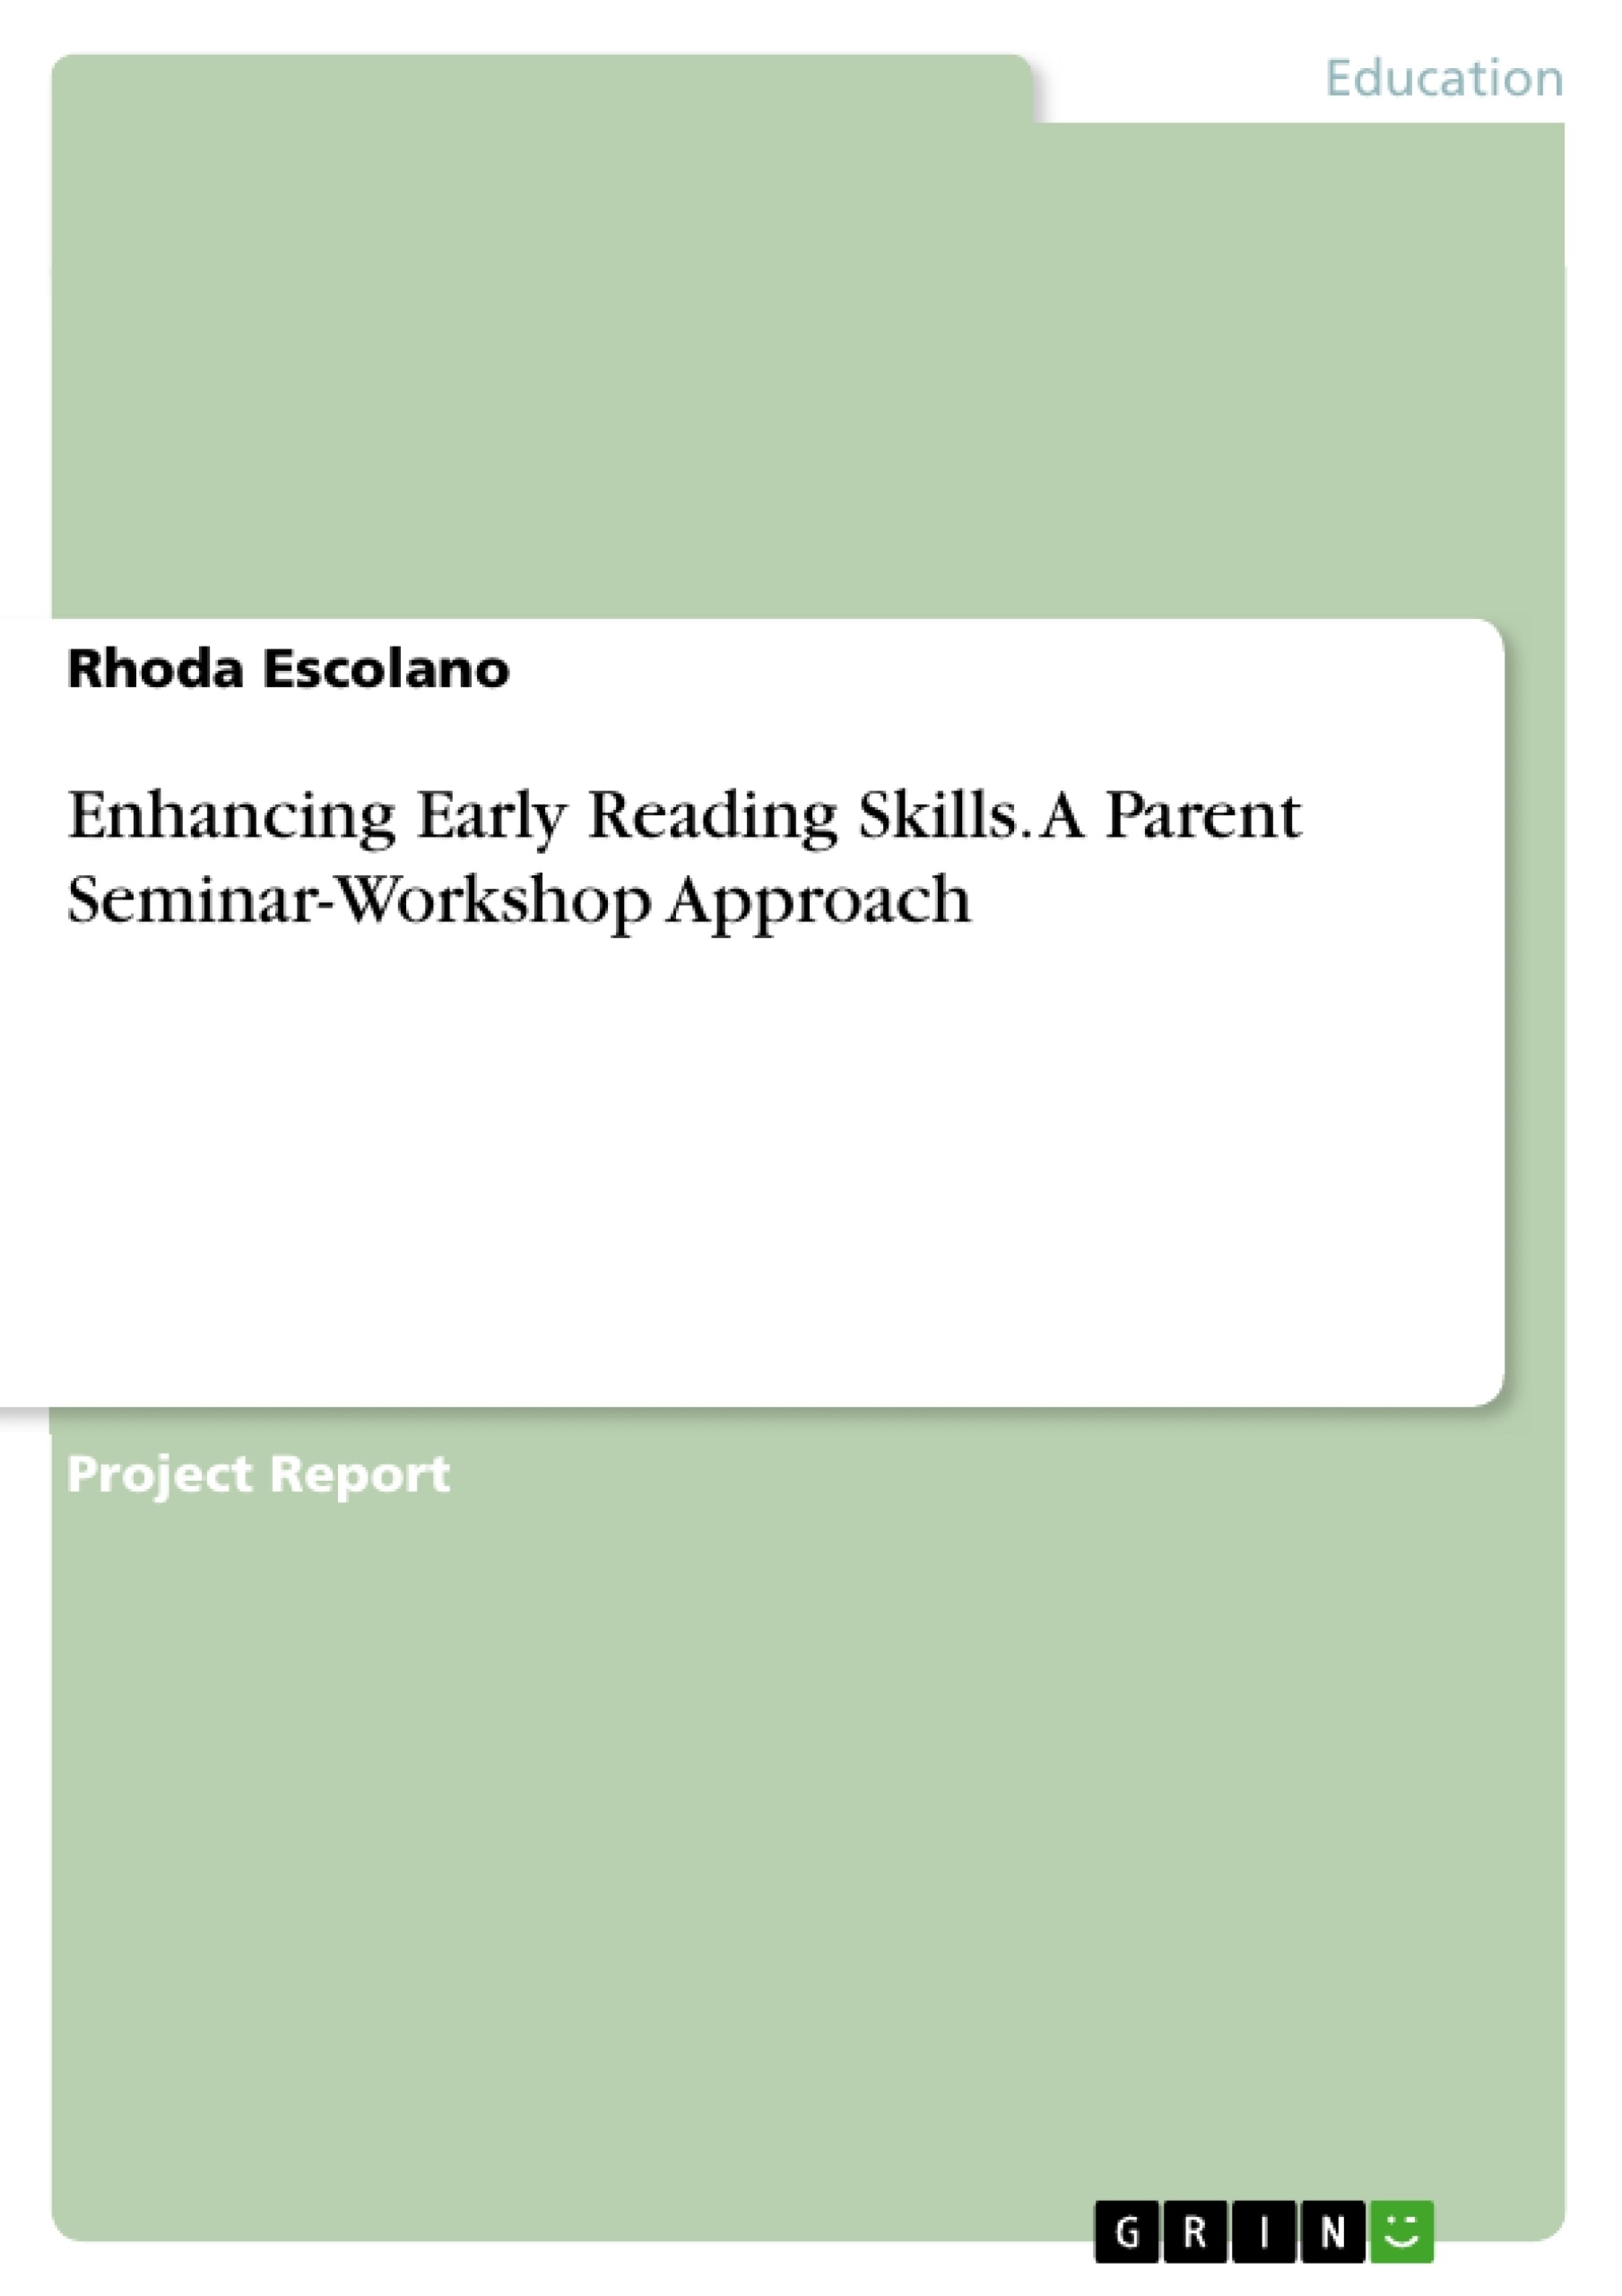 Title: Enhancing Early Reading Skills. A Parent Seminar-Workshop Approach